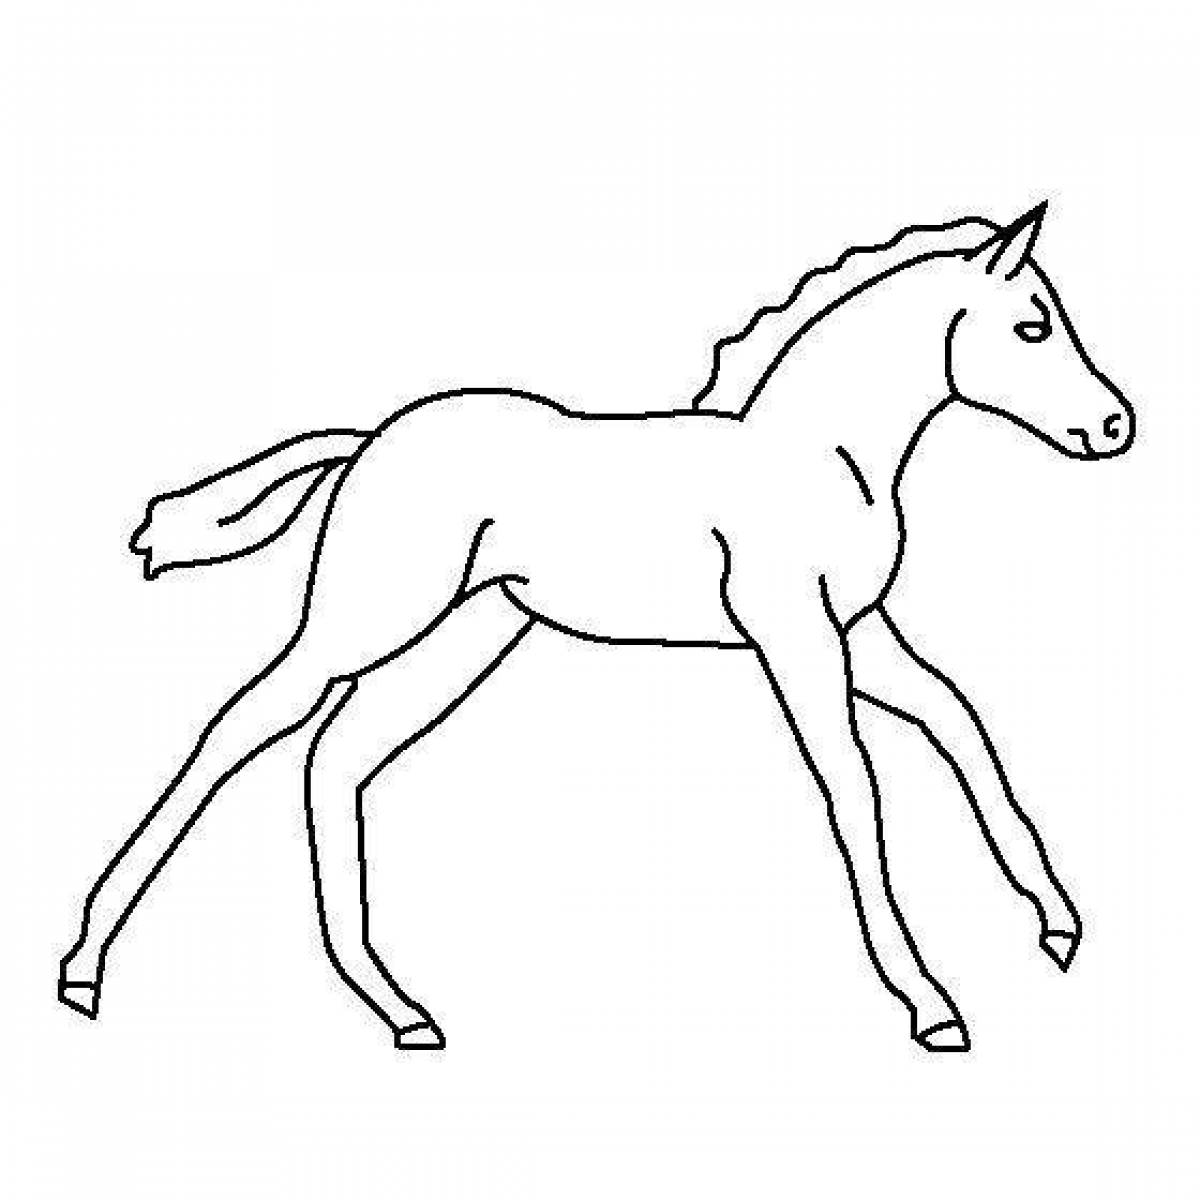 Coloring page of a foal